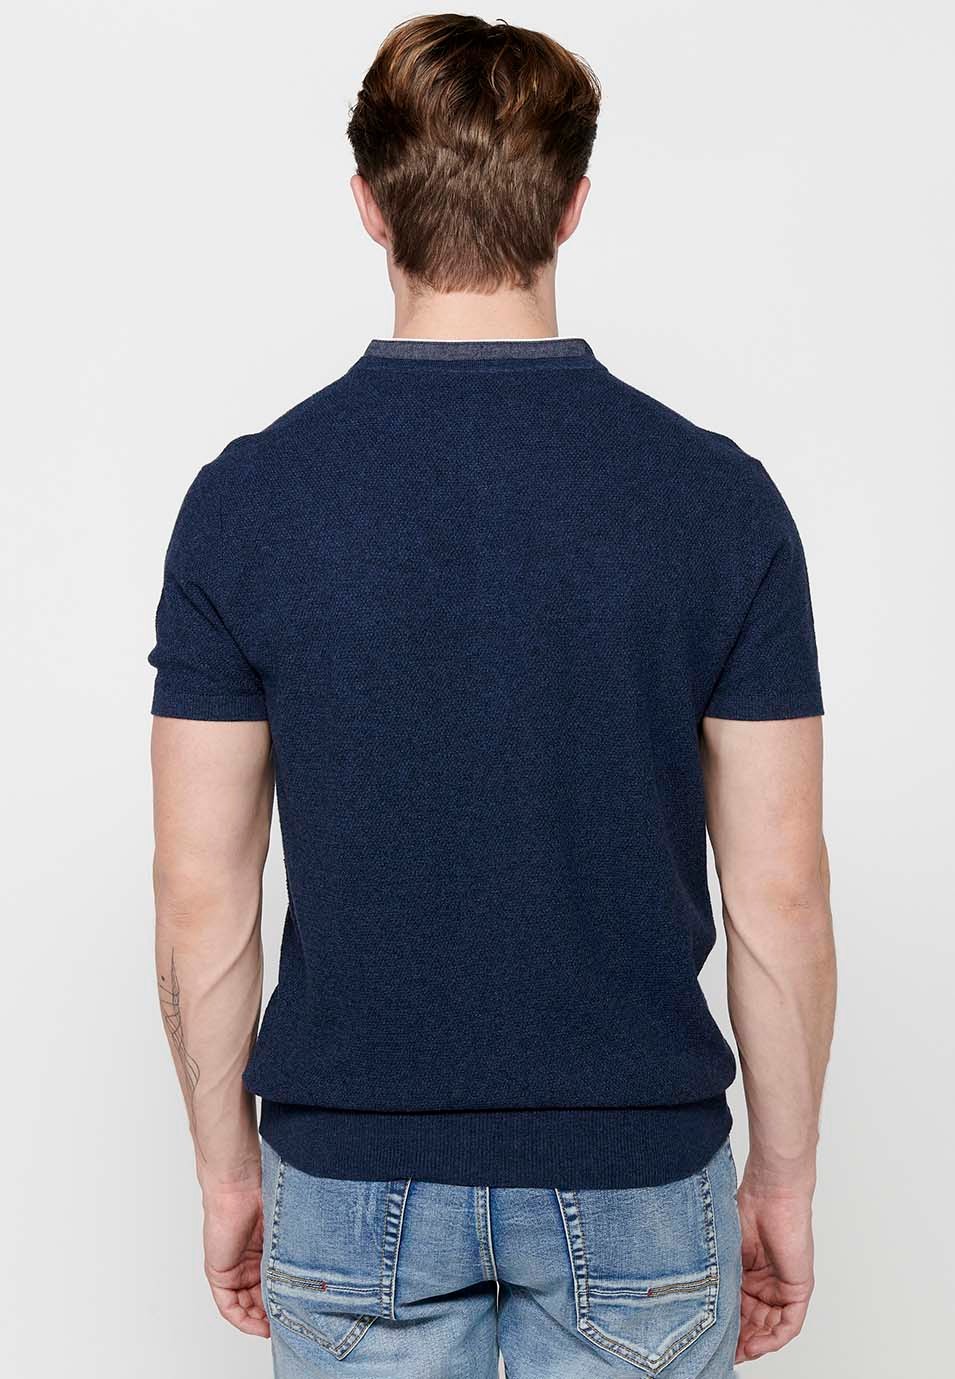 Short Sleeve Cotton Polo Shirt with Round Neck with Buttoned Opening and Textured Navy Color for Men